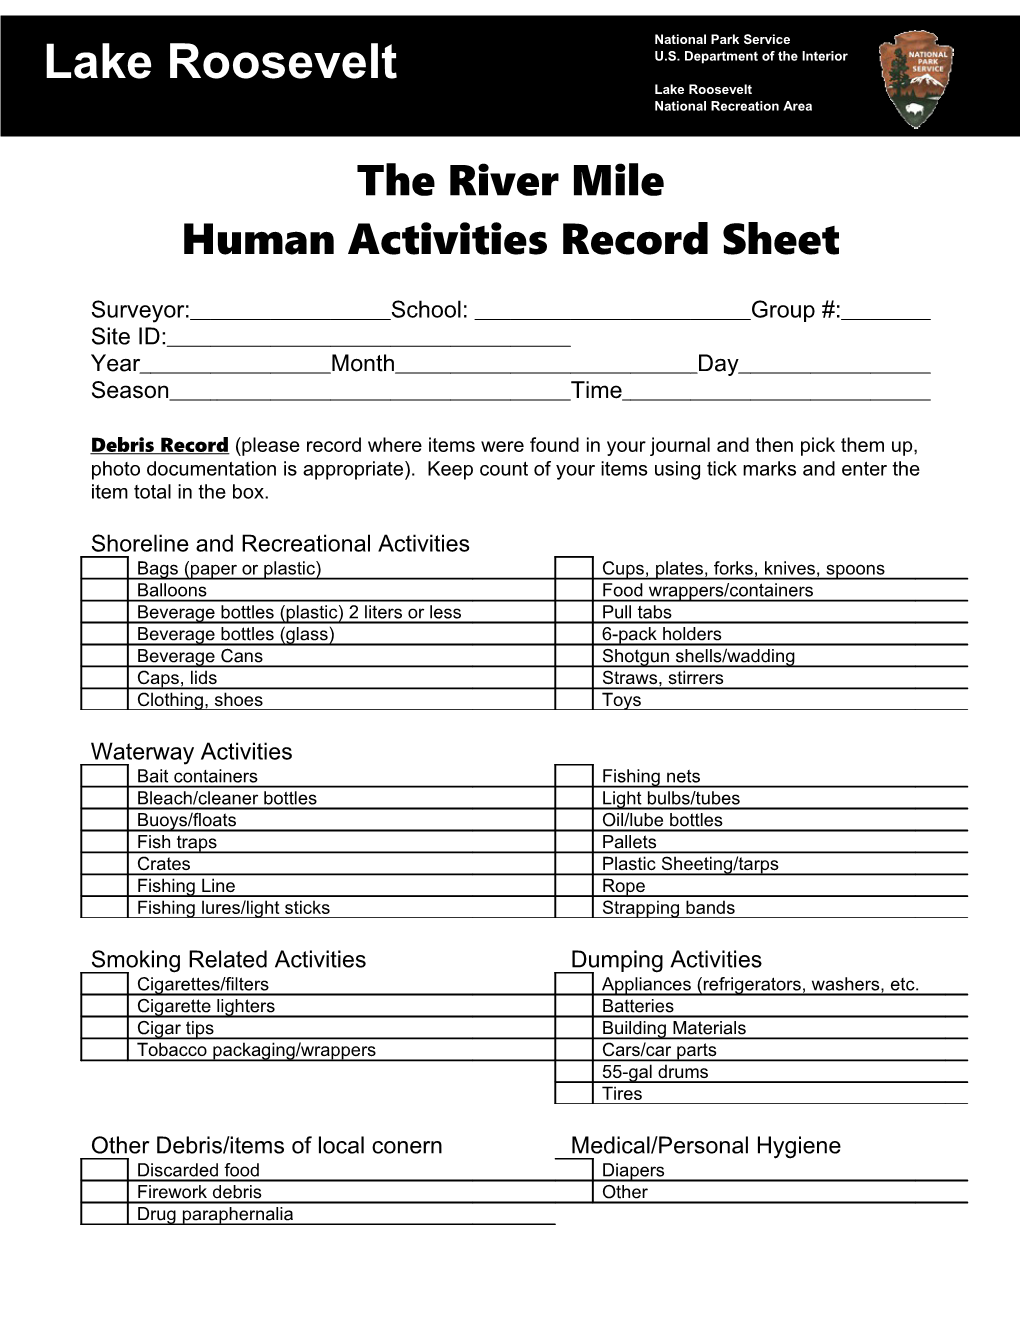 The River Mile